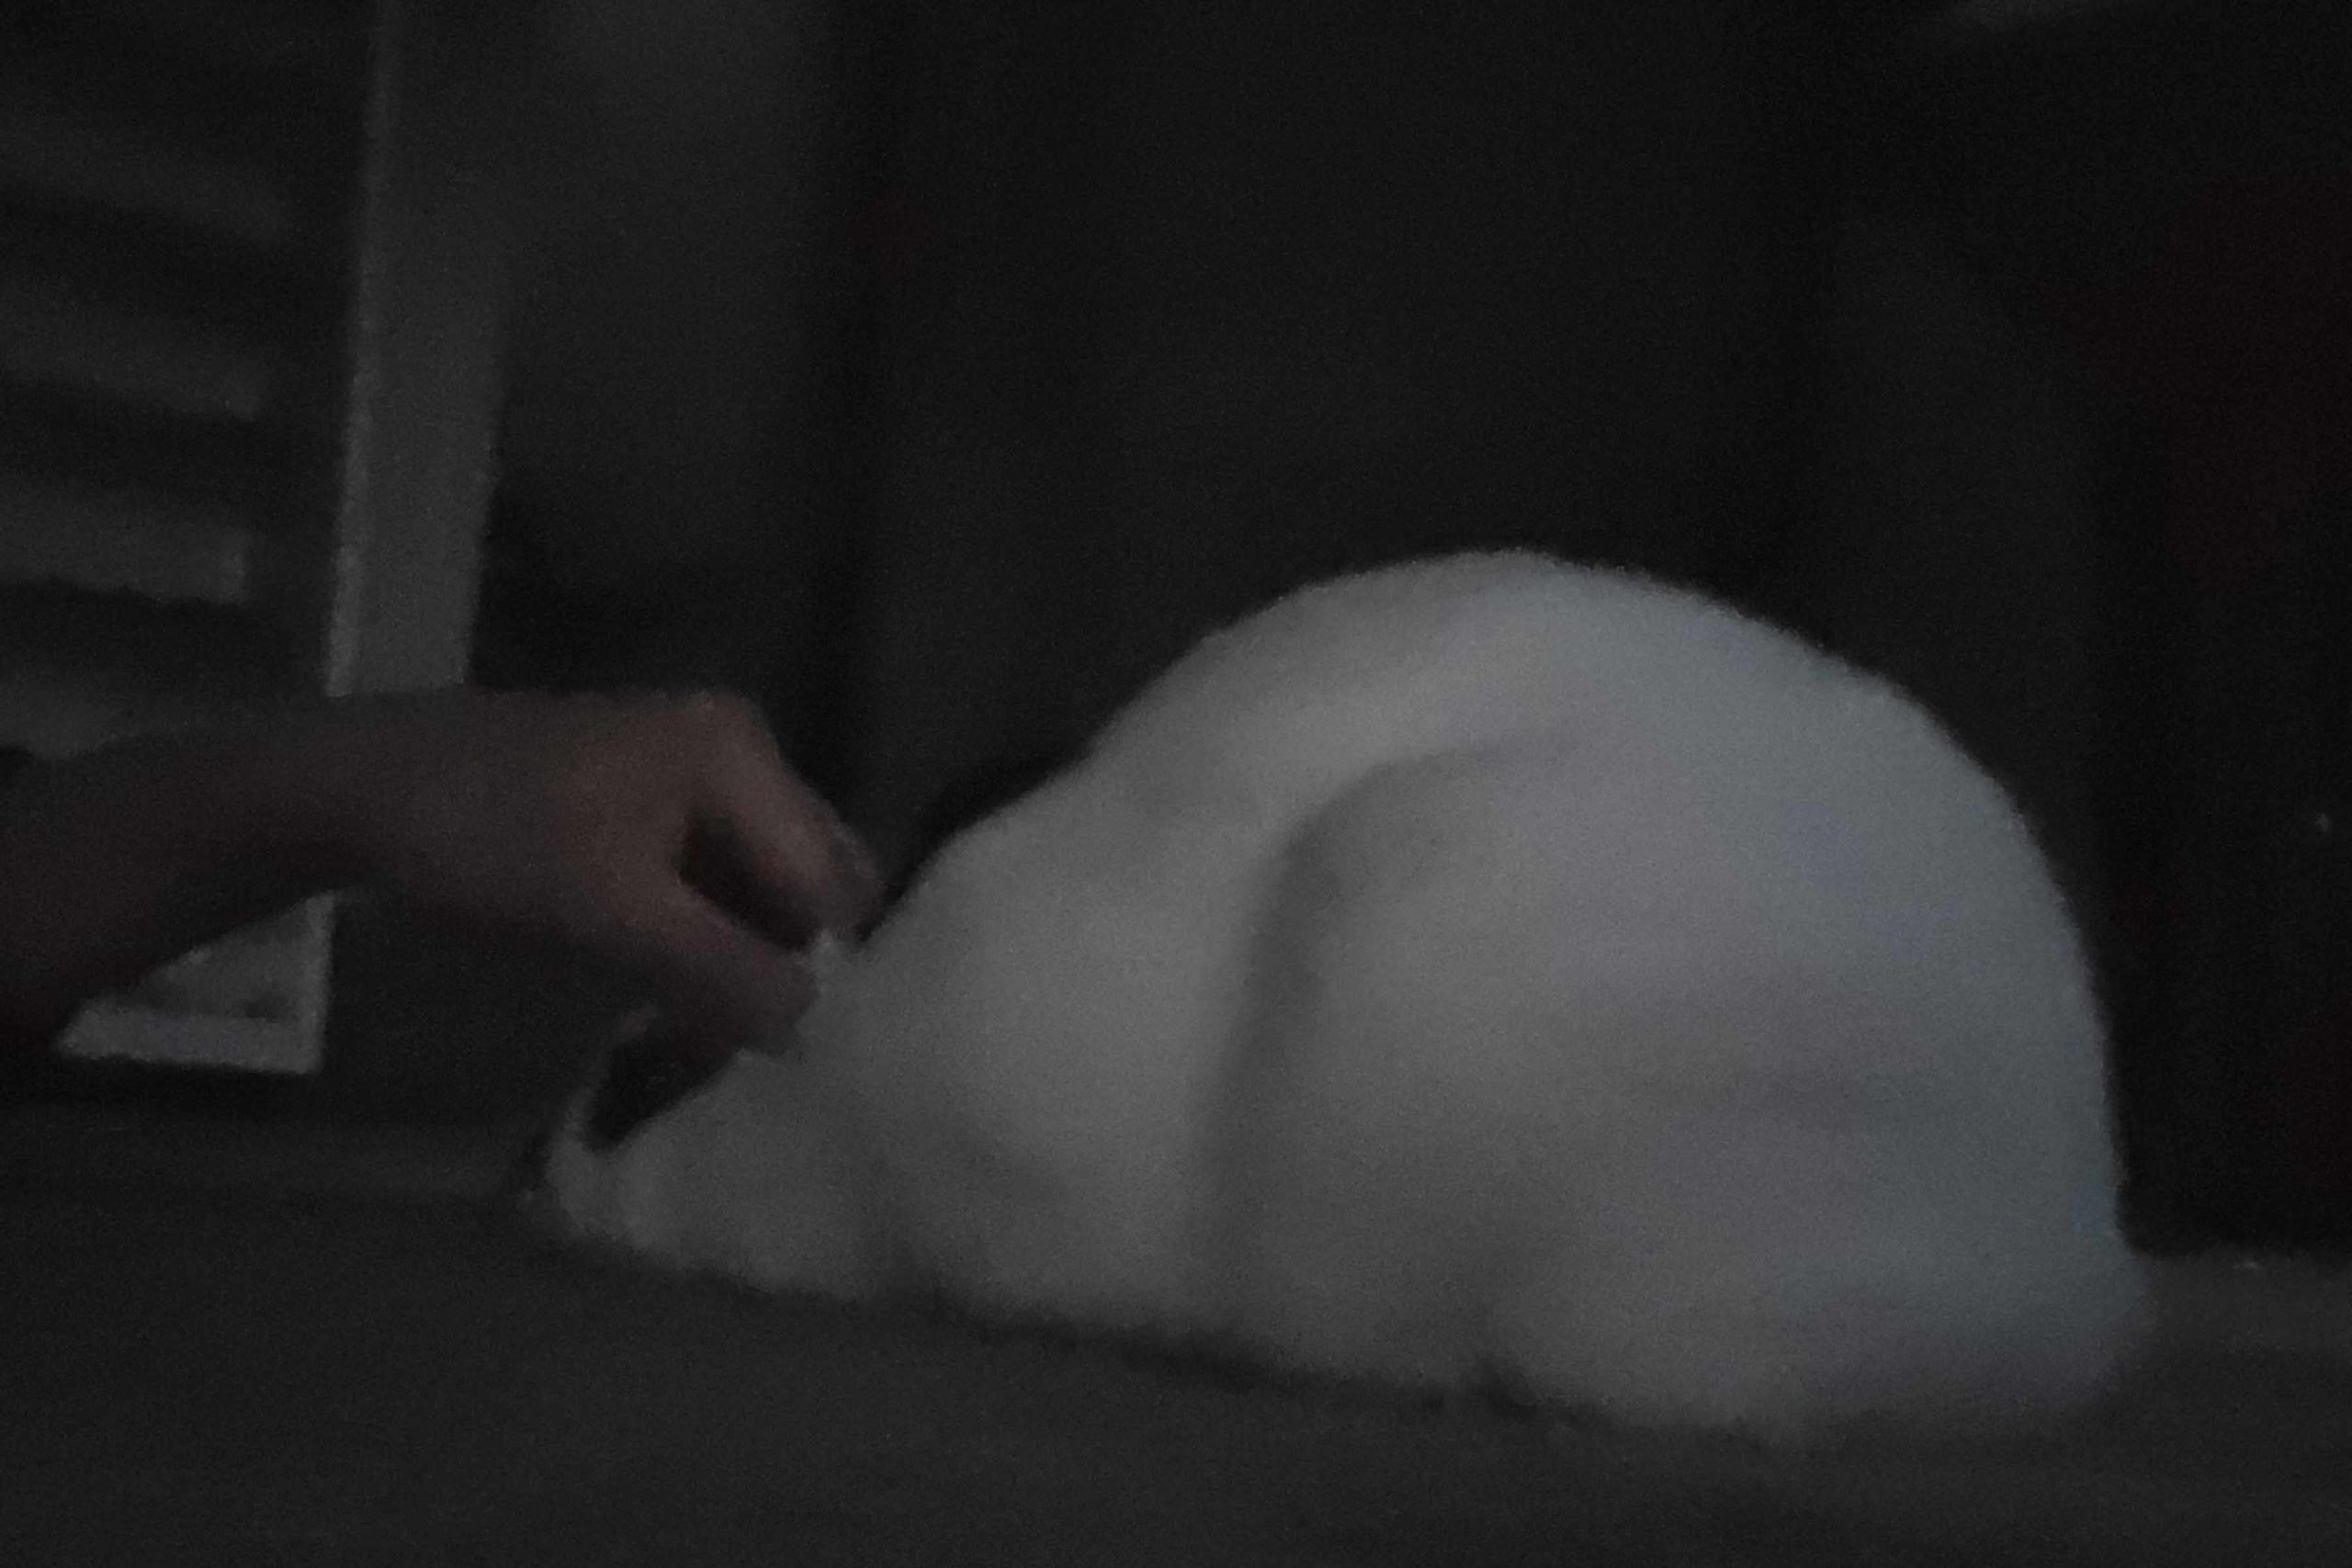 When the power goes out, there's nothing to do but pet the bunnies!